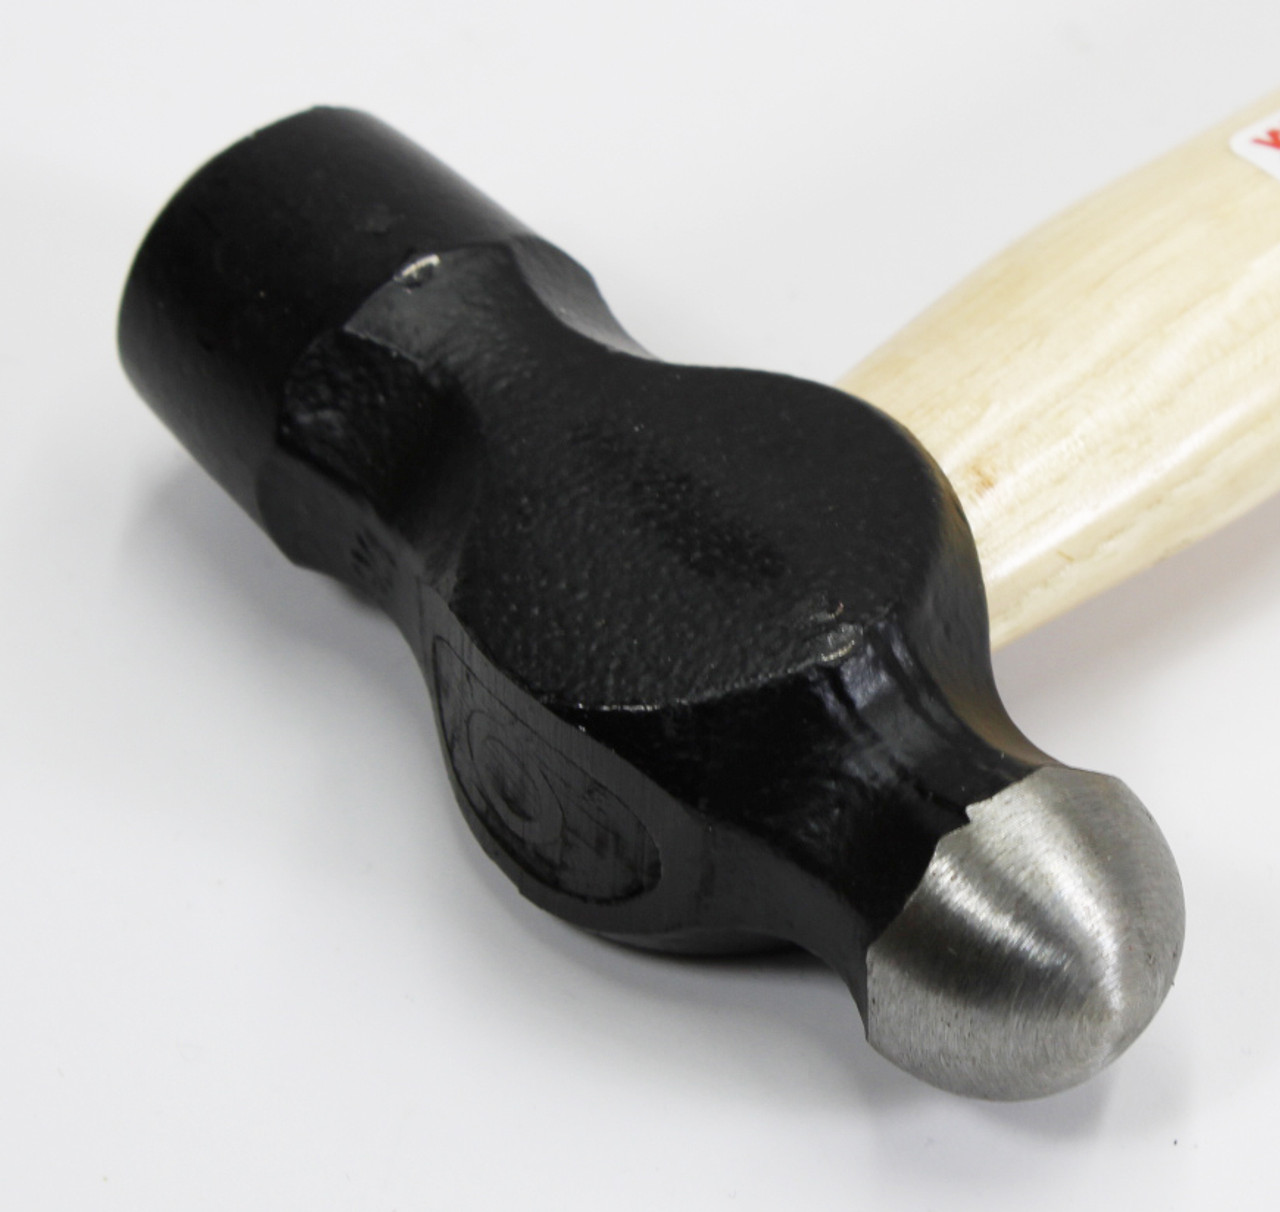 Picard Ball Pein Hammer, 340 gm (3/4 lb.) with wood handle.